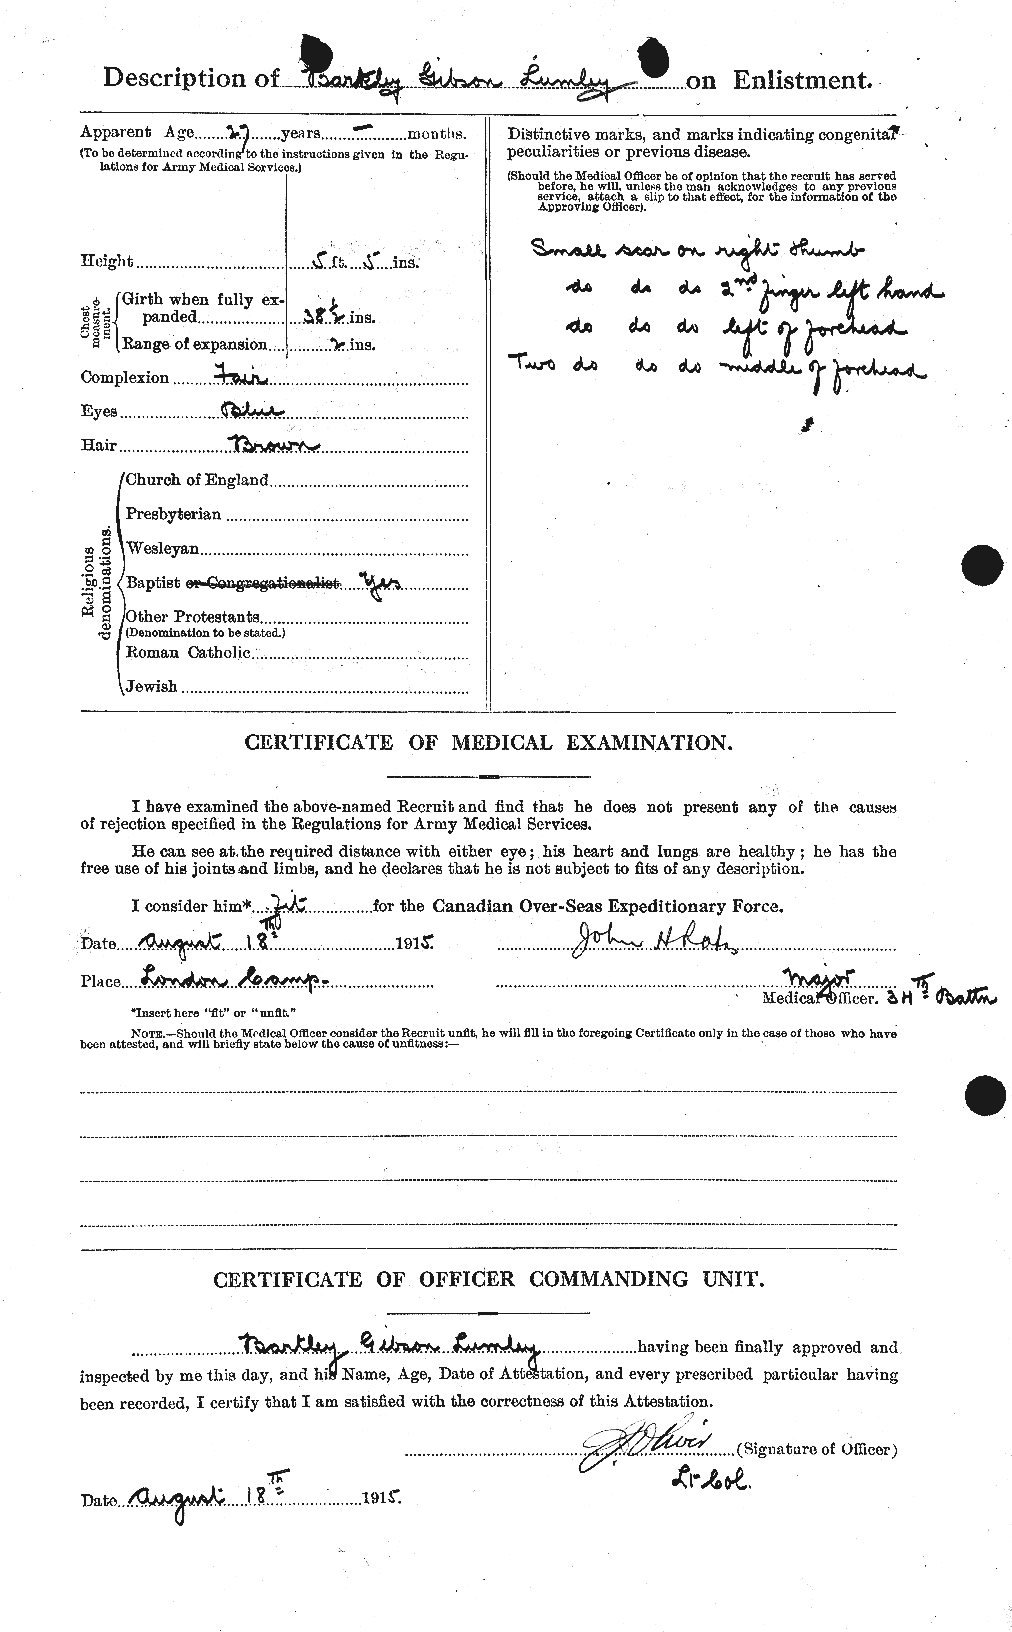 Personnel Records of the First World War - CEF 470799b